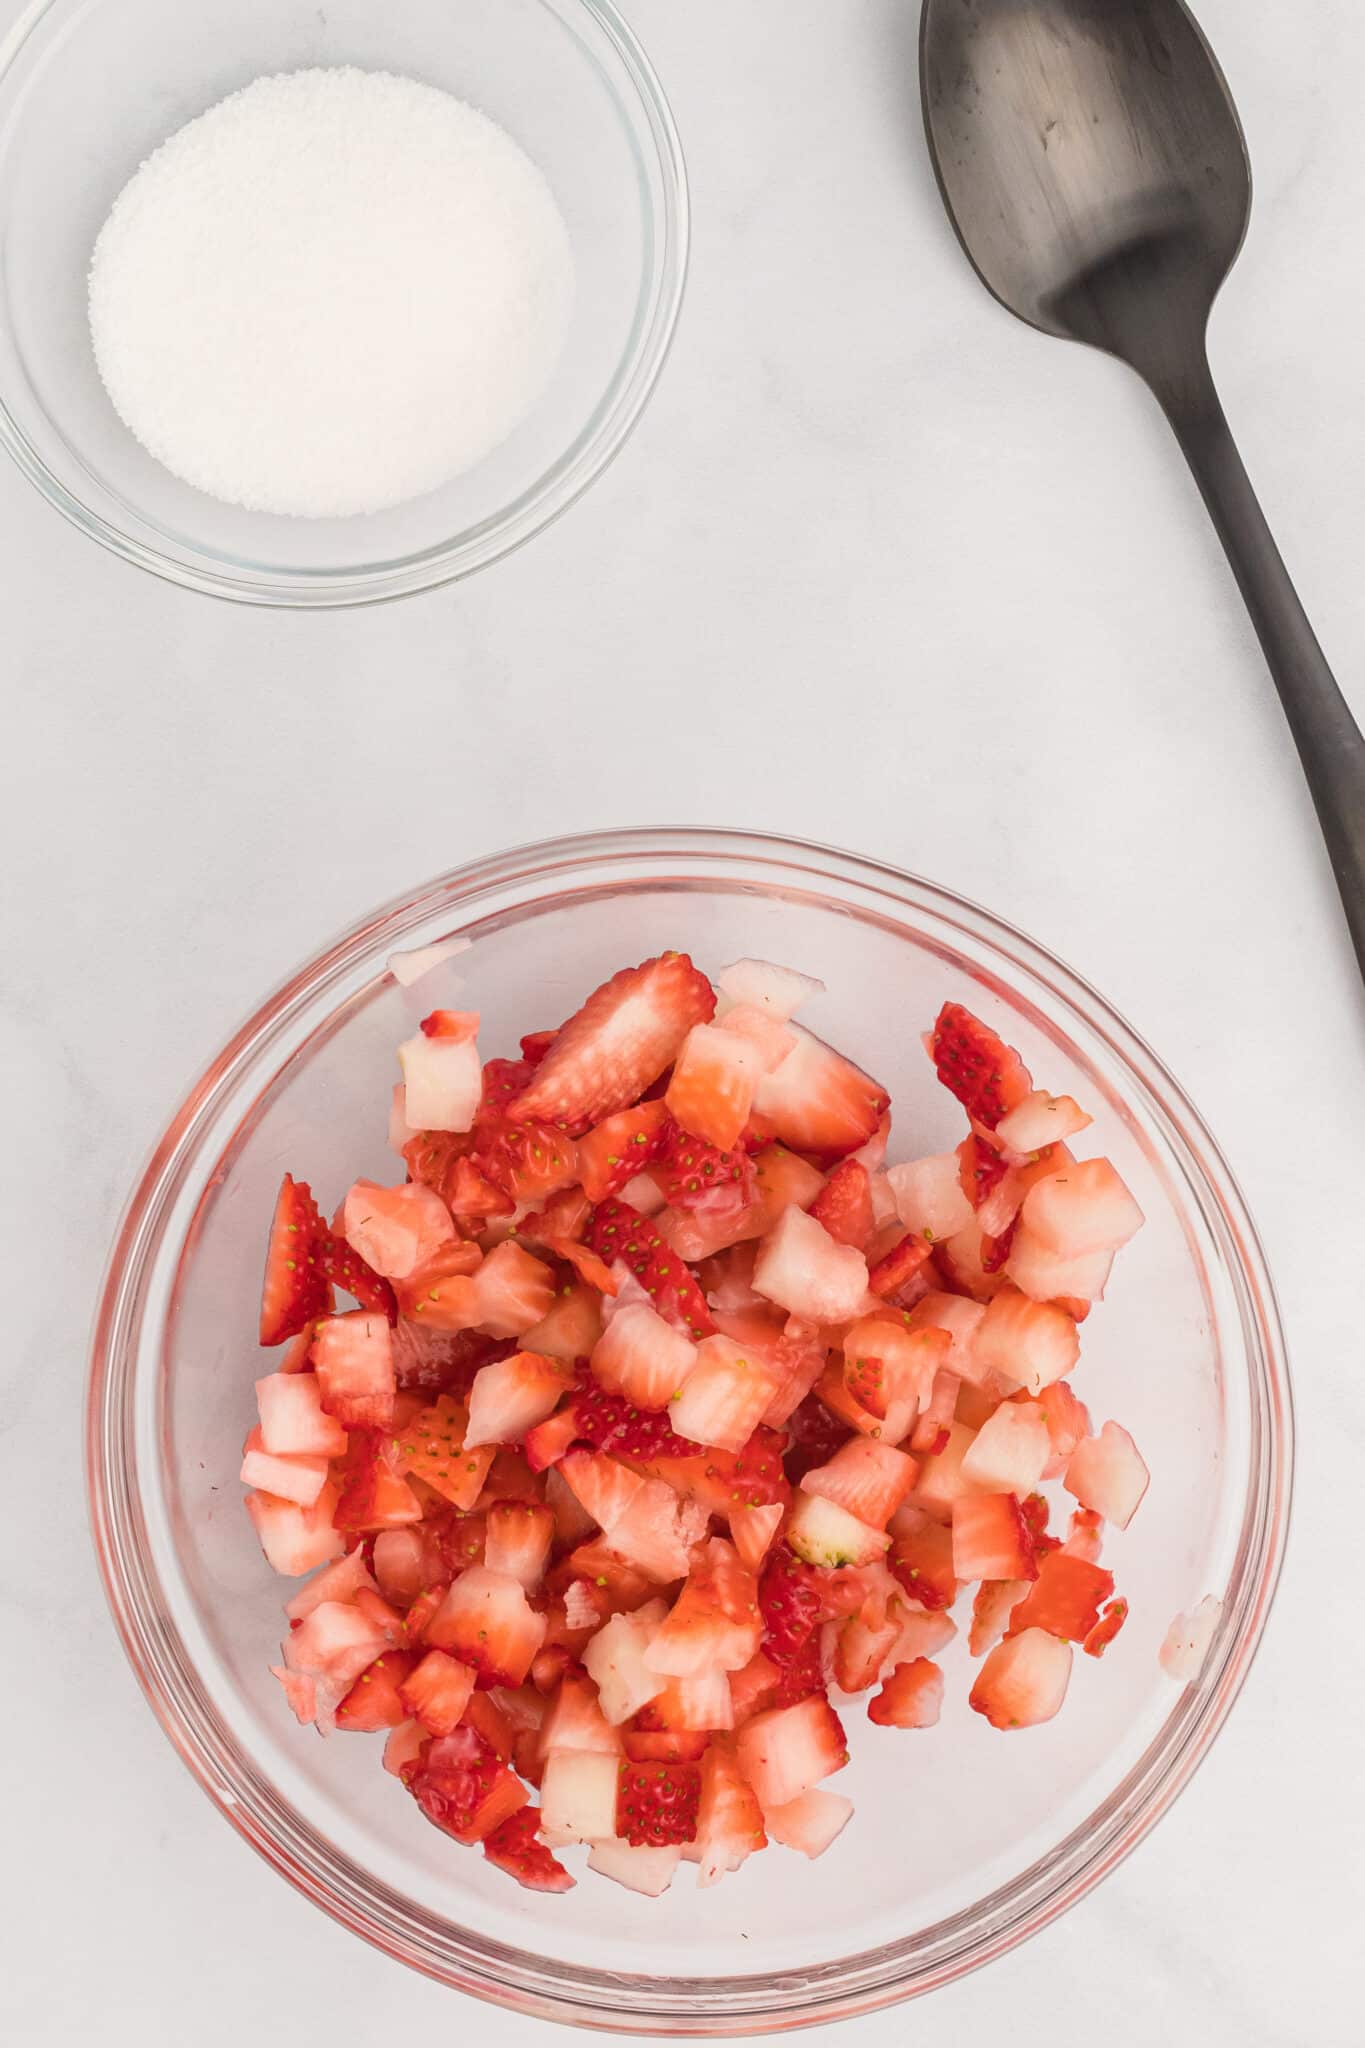 Mixing the strawberries and sugar.